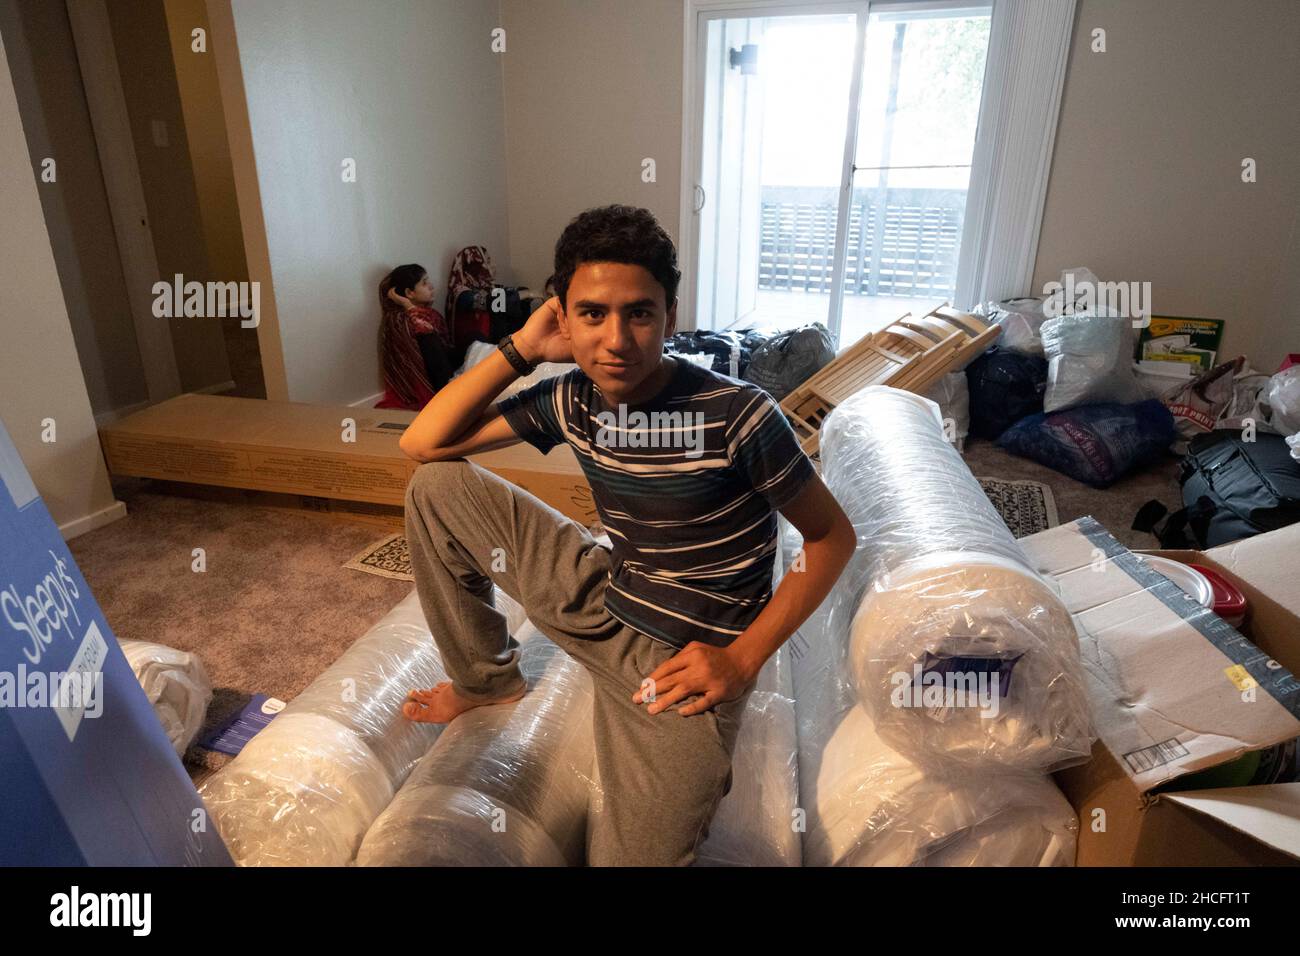 Austin Texas USA, October 2021: Afghan teen poses with rolled-up new mattresses in his family's new apartment in a complex near downtown. Refugees fleeing turmoil in Afghanistan continue to be resettled in Texas with many single men and large families with children moving into apartments across Austin. Faith-based and other non-profit groups have stepped up to help coordinate efforts in furnishing homes for hundreds of refugees. ©Bob Daemmrich Stock Photo